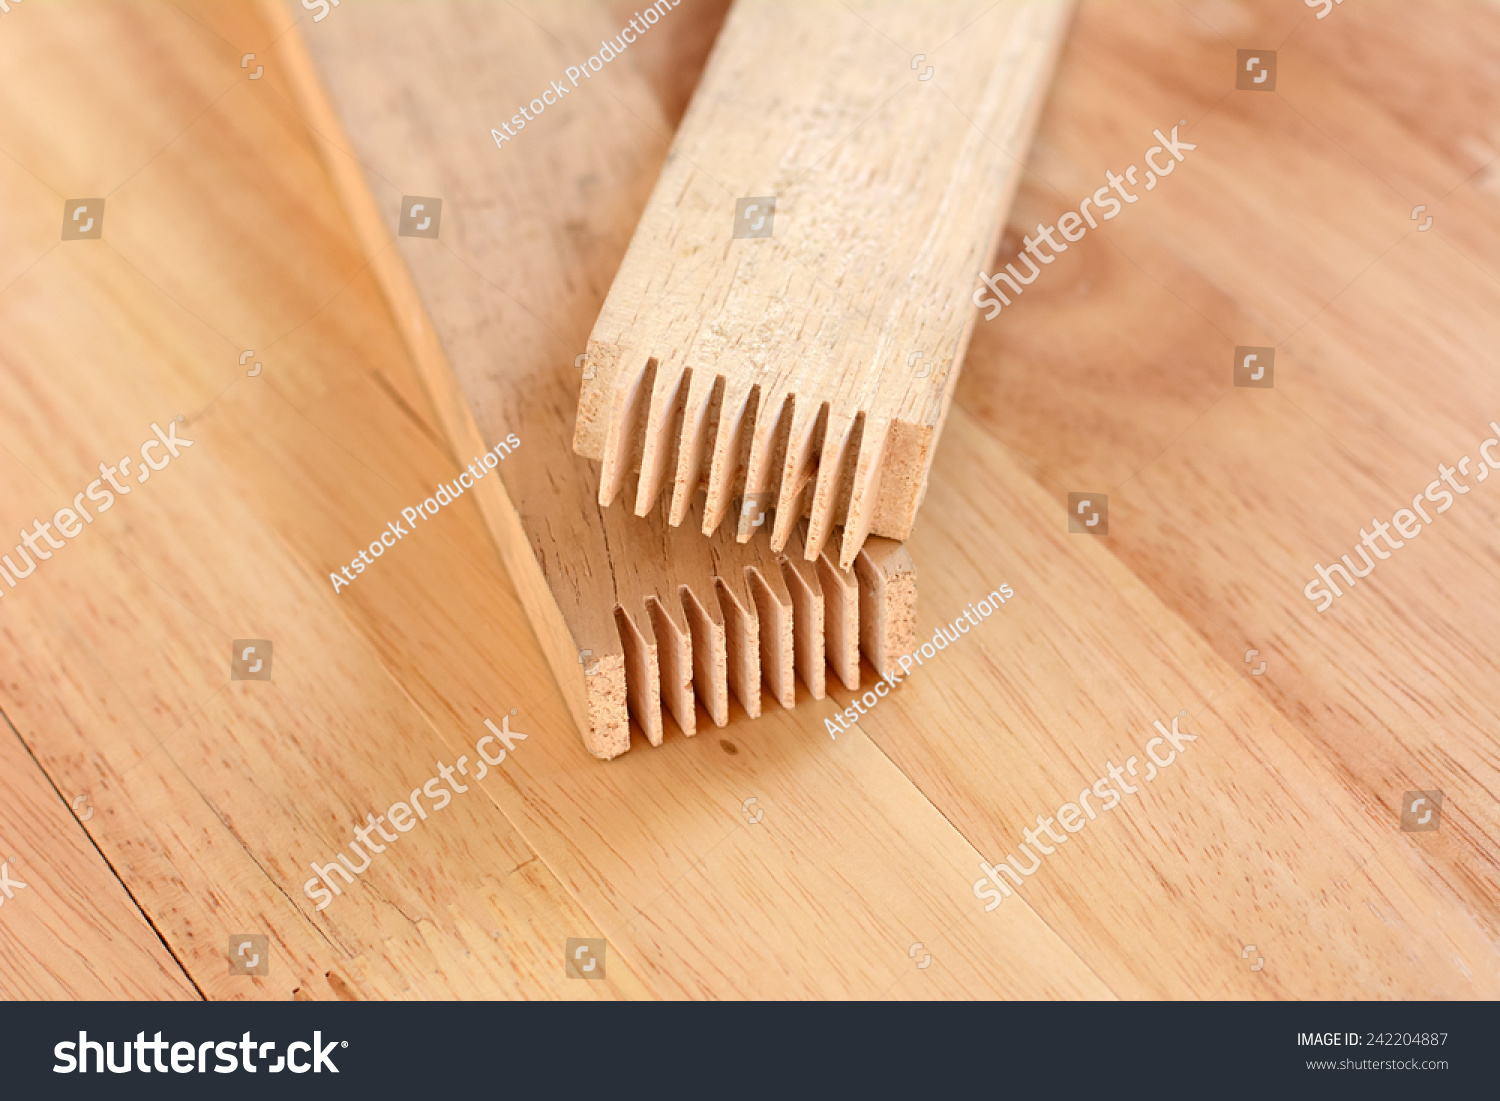 Finger Joint End Wood Sticks Or Stock Photo 242204887 